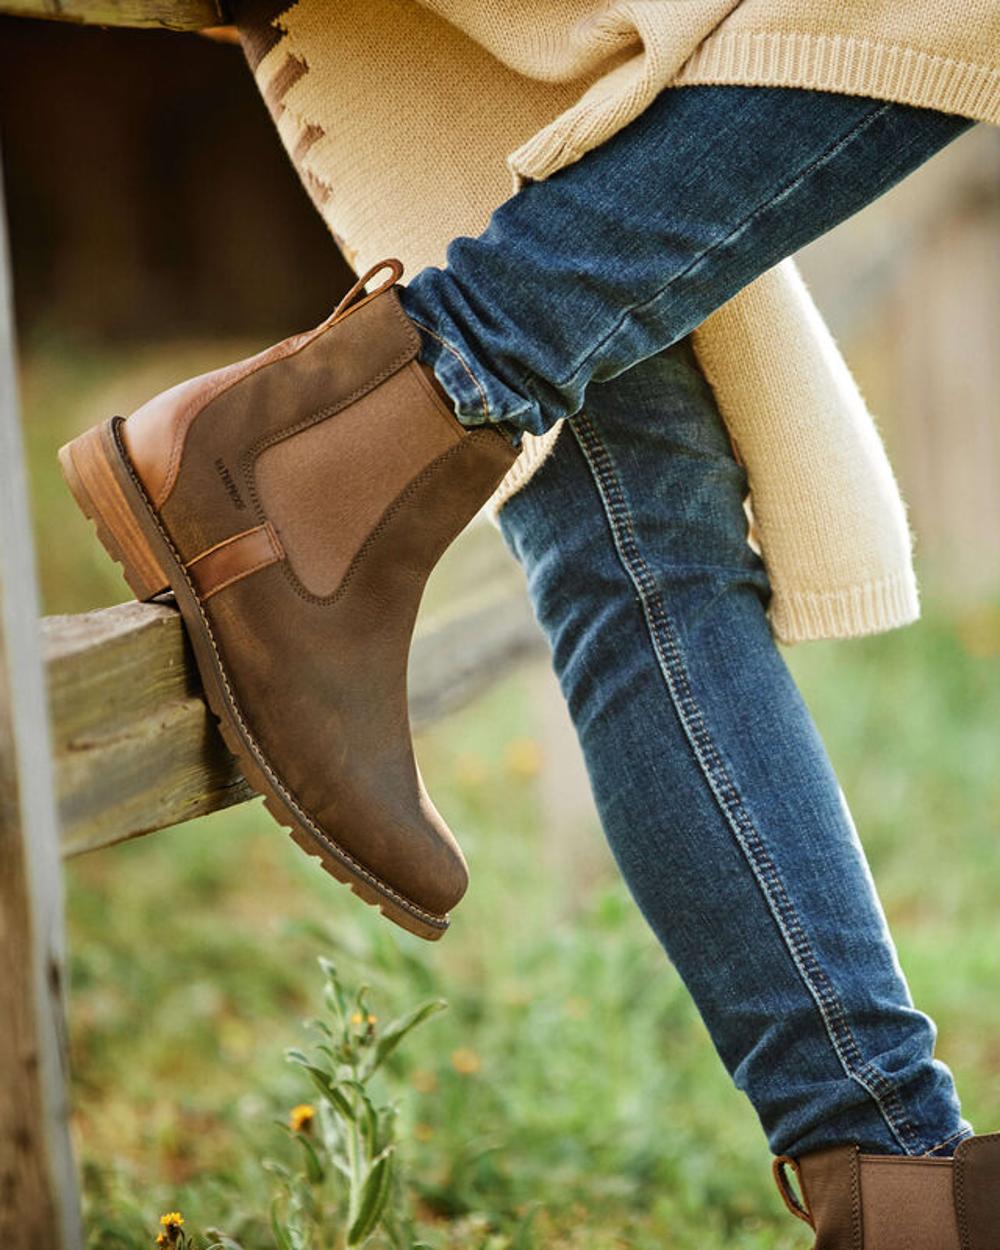 Ariat Womens Wexford Waterproof Boots in Java 